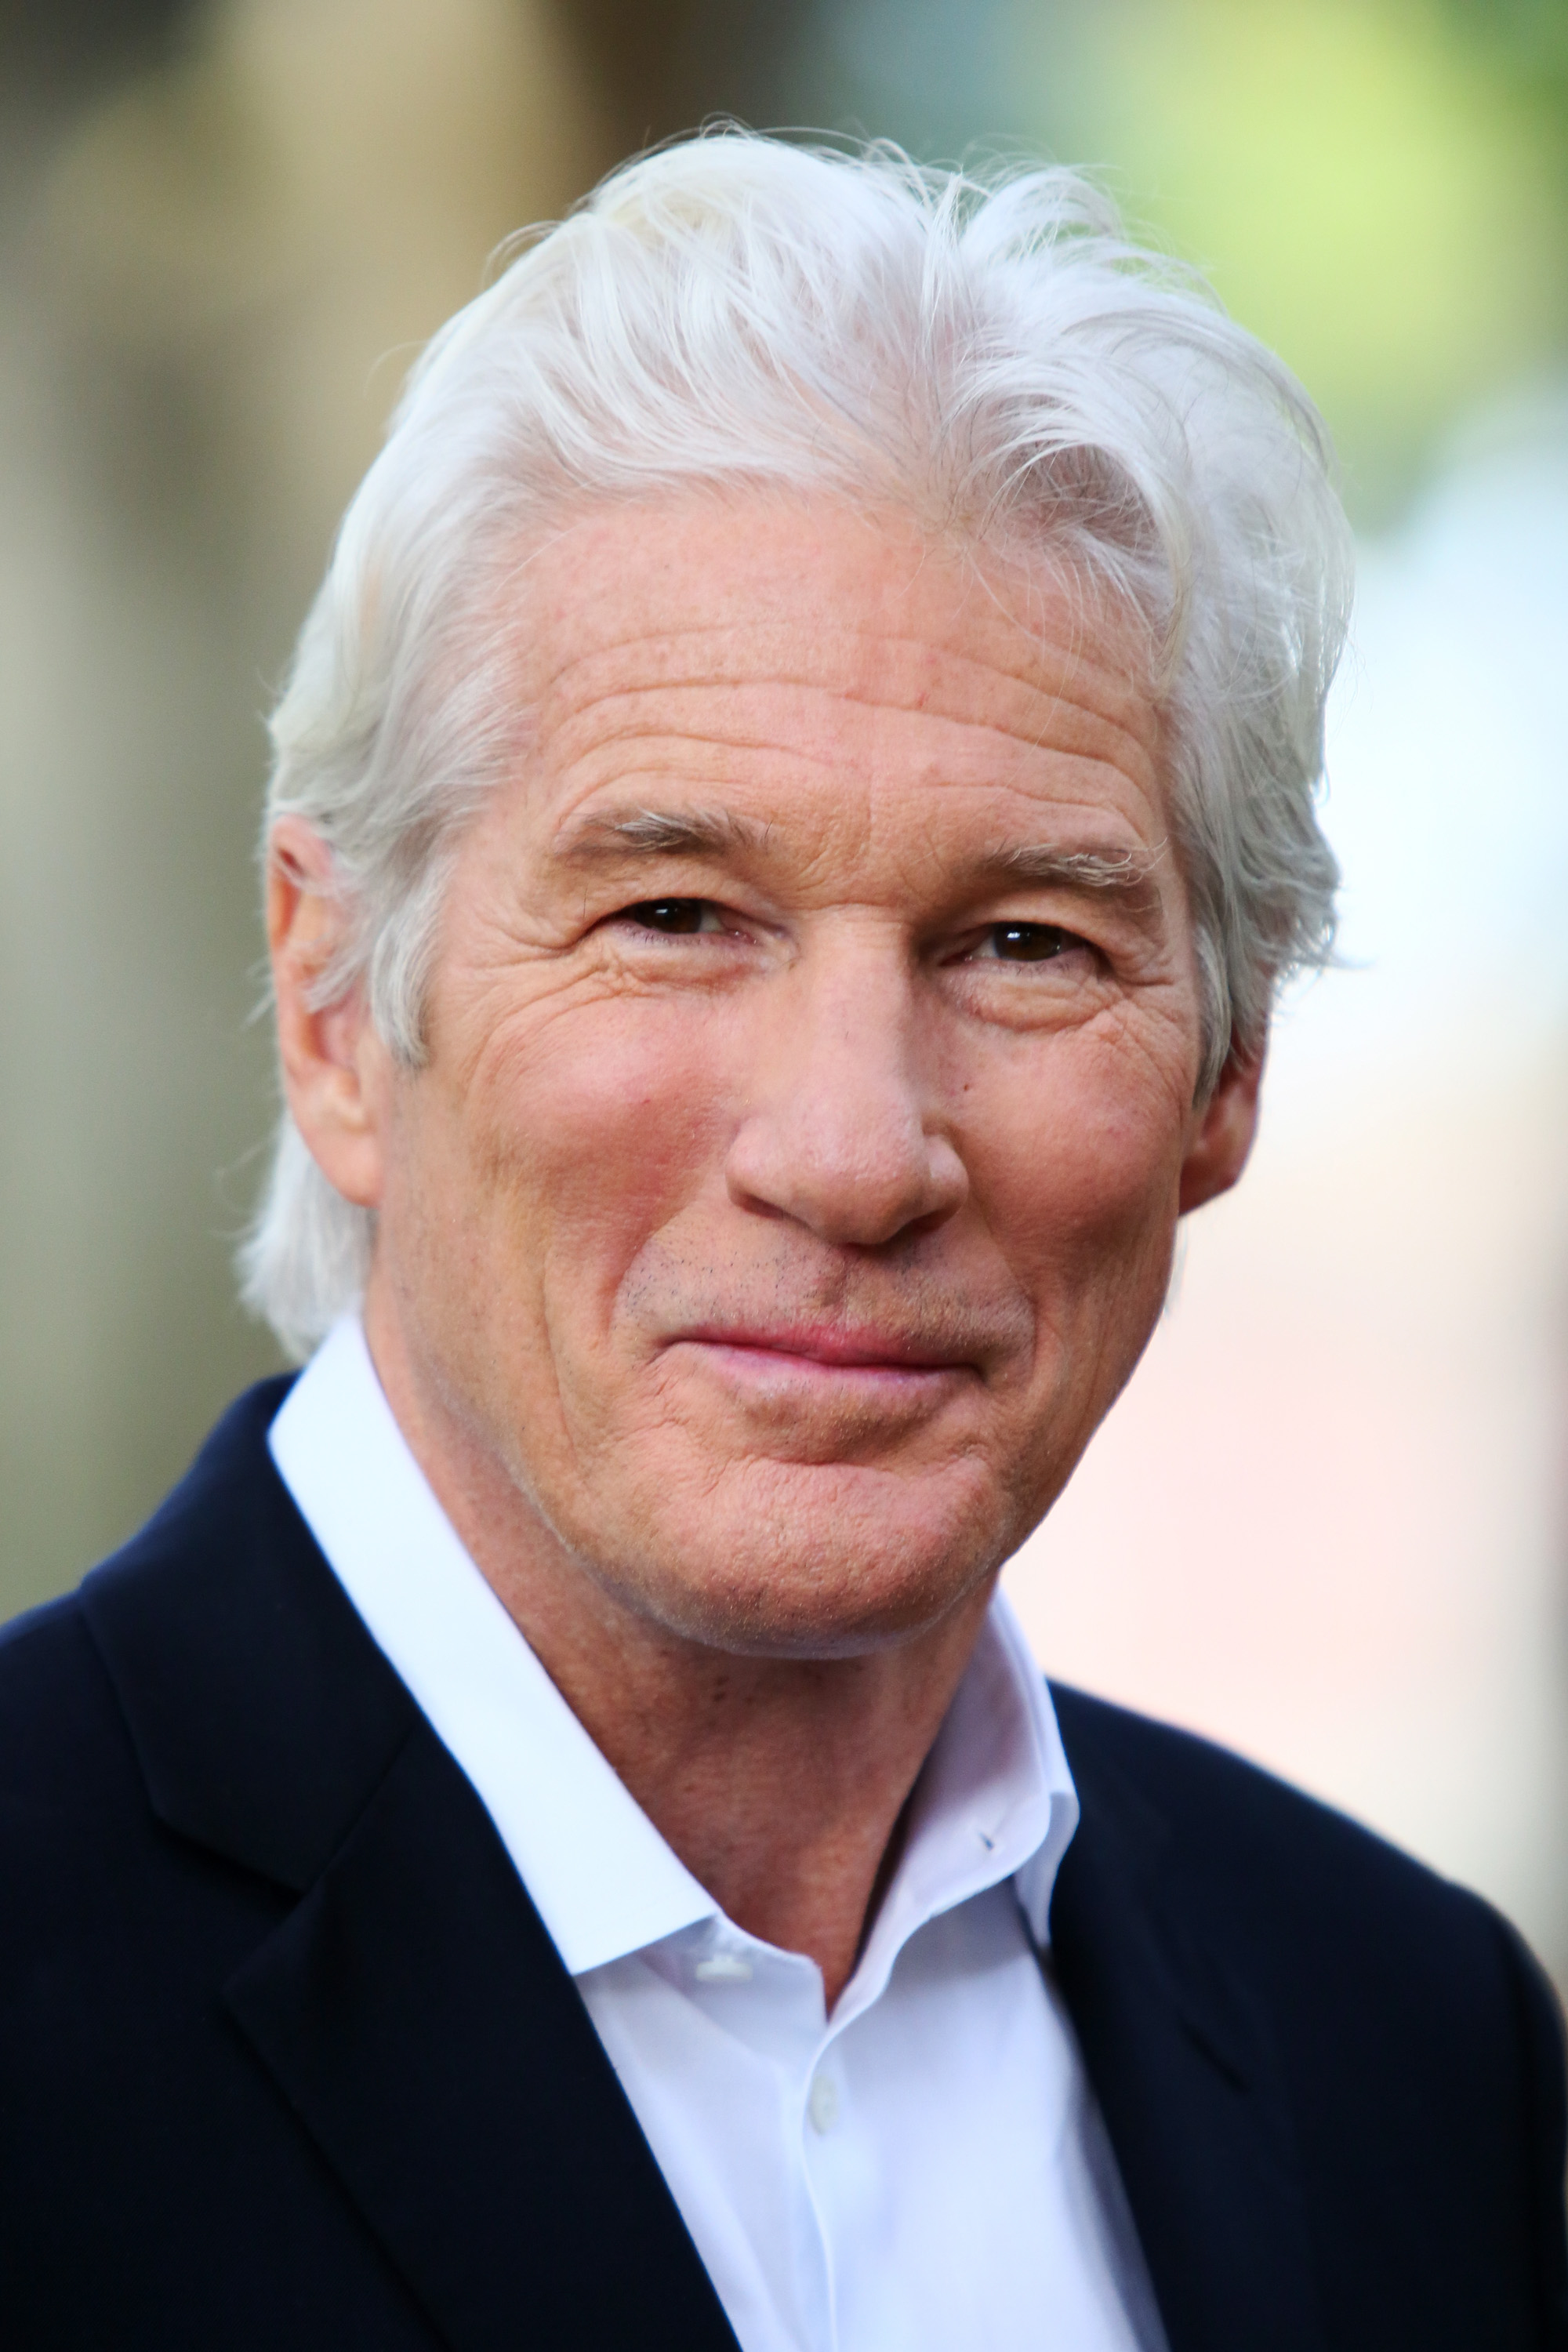 Richard Gere attends a photocall for "Franny" at La Casa Del Cinema on December 14, 2015 in Rome, Italy. | Source: Getty Images